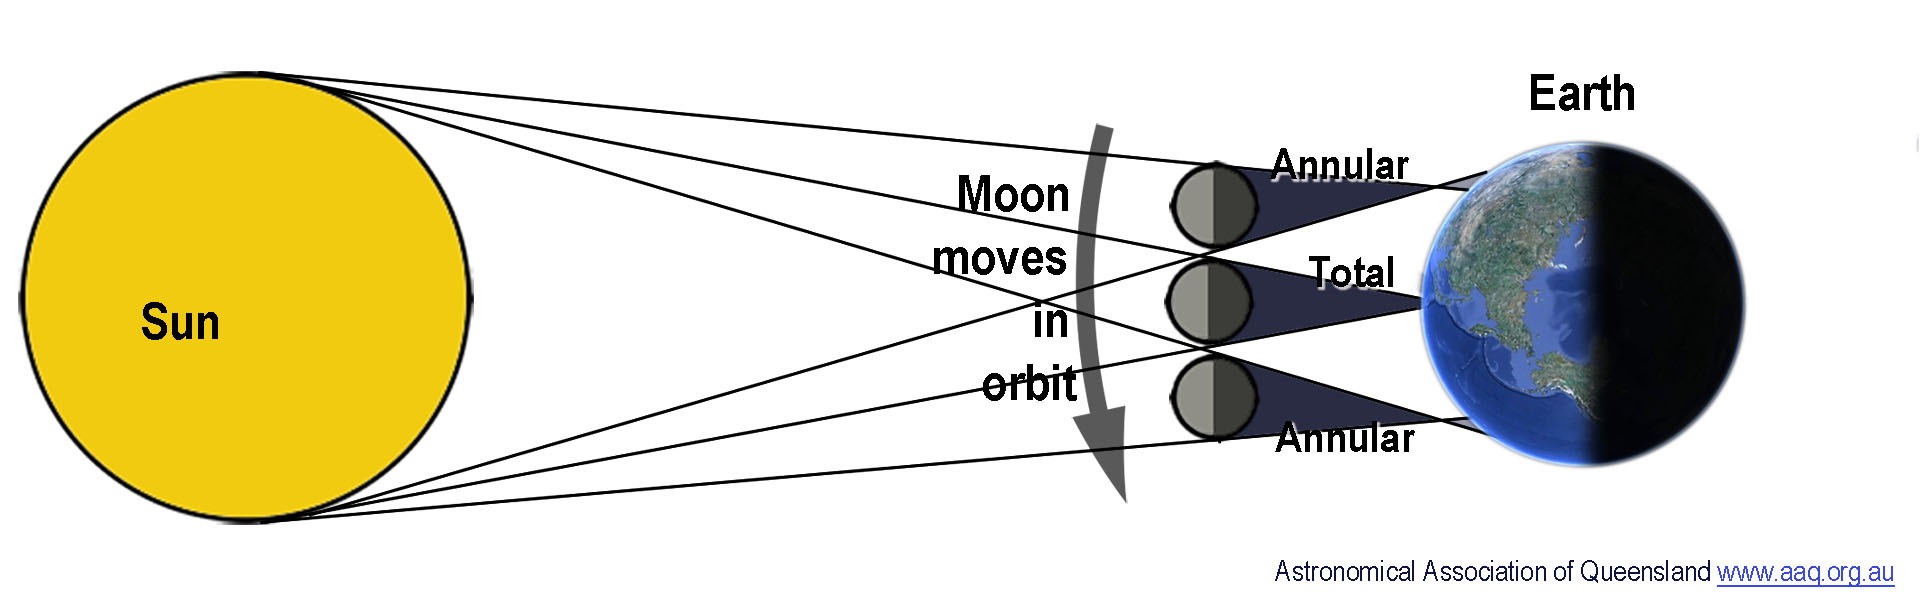 The diagram shows the Moon moving in orbit between the Sun and Earth. When directly in line with Earth the Moon’s umbra can just reach Earth and a total eclipse can occur but before and after that position because of the curvature of Earth the Moon’s umbra does not reach Earth and an annular eclipse will occur.